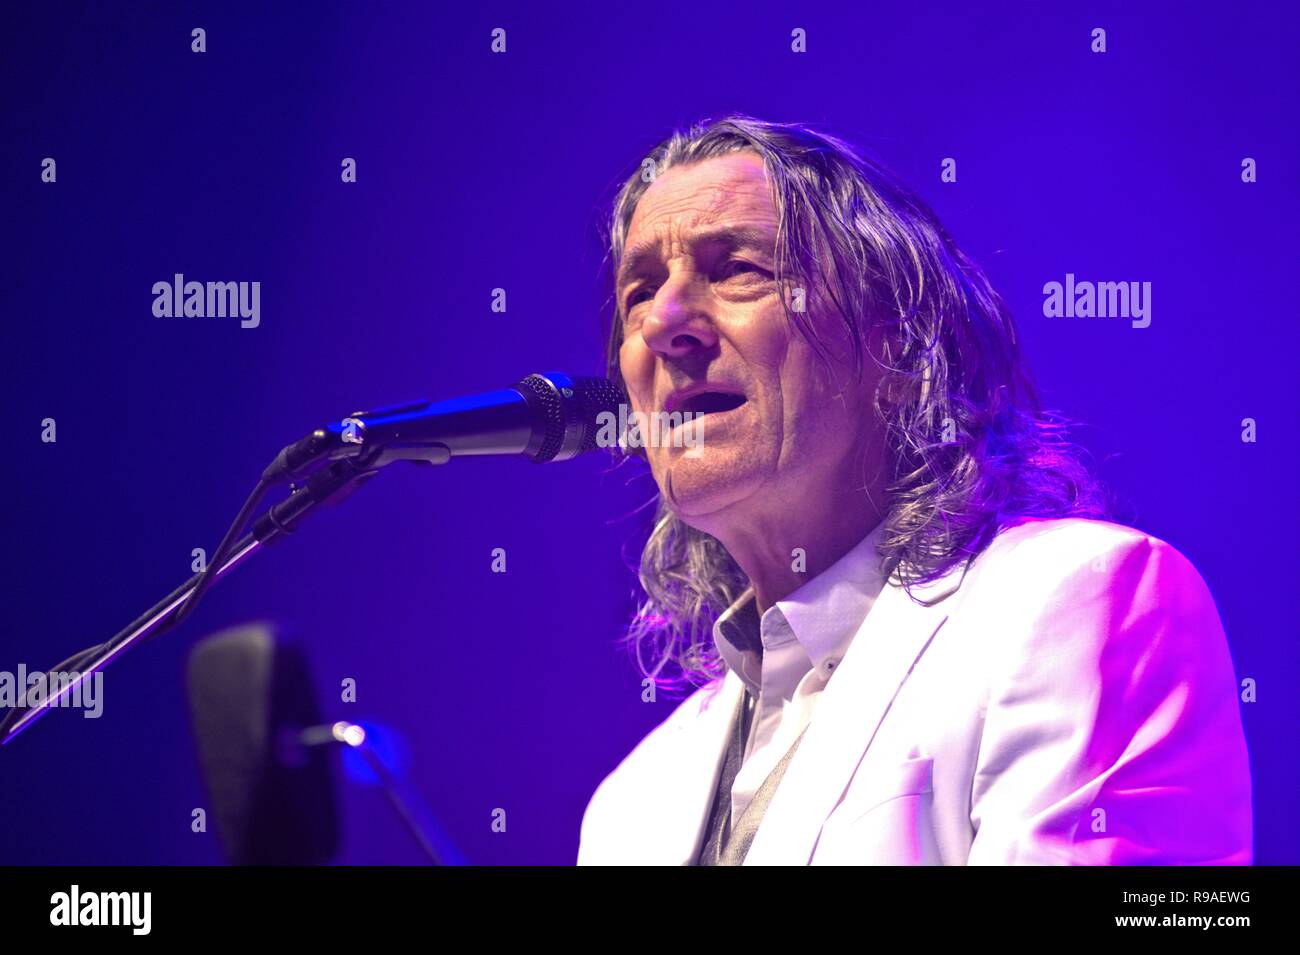 04. August 2017 - Roger Hodgson and Charles Roger Pomfret Hodgson, withbegrunder, former frontman, singer and songwriter of the British pop/rock band Supertramp at his concert at Holstenhalle 1 in Neumunster. The gig was part of the "Breakfast in America" World Tour, hosted by the Schleswig-Holstein Music Festival. | August, the 4th, 2017 - Roger Hodgson aka Charles Roger Pomfret Hodgson, founder, prior frontman, singer and songwriter of British pop/rock band Supertramp at his concert in the Holstenhalle 1 in Neumuenster, Germany. The show is in the context of the Breakfast in America worl Stock Photo